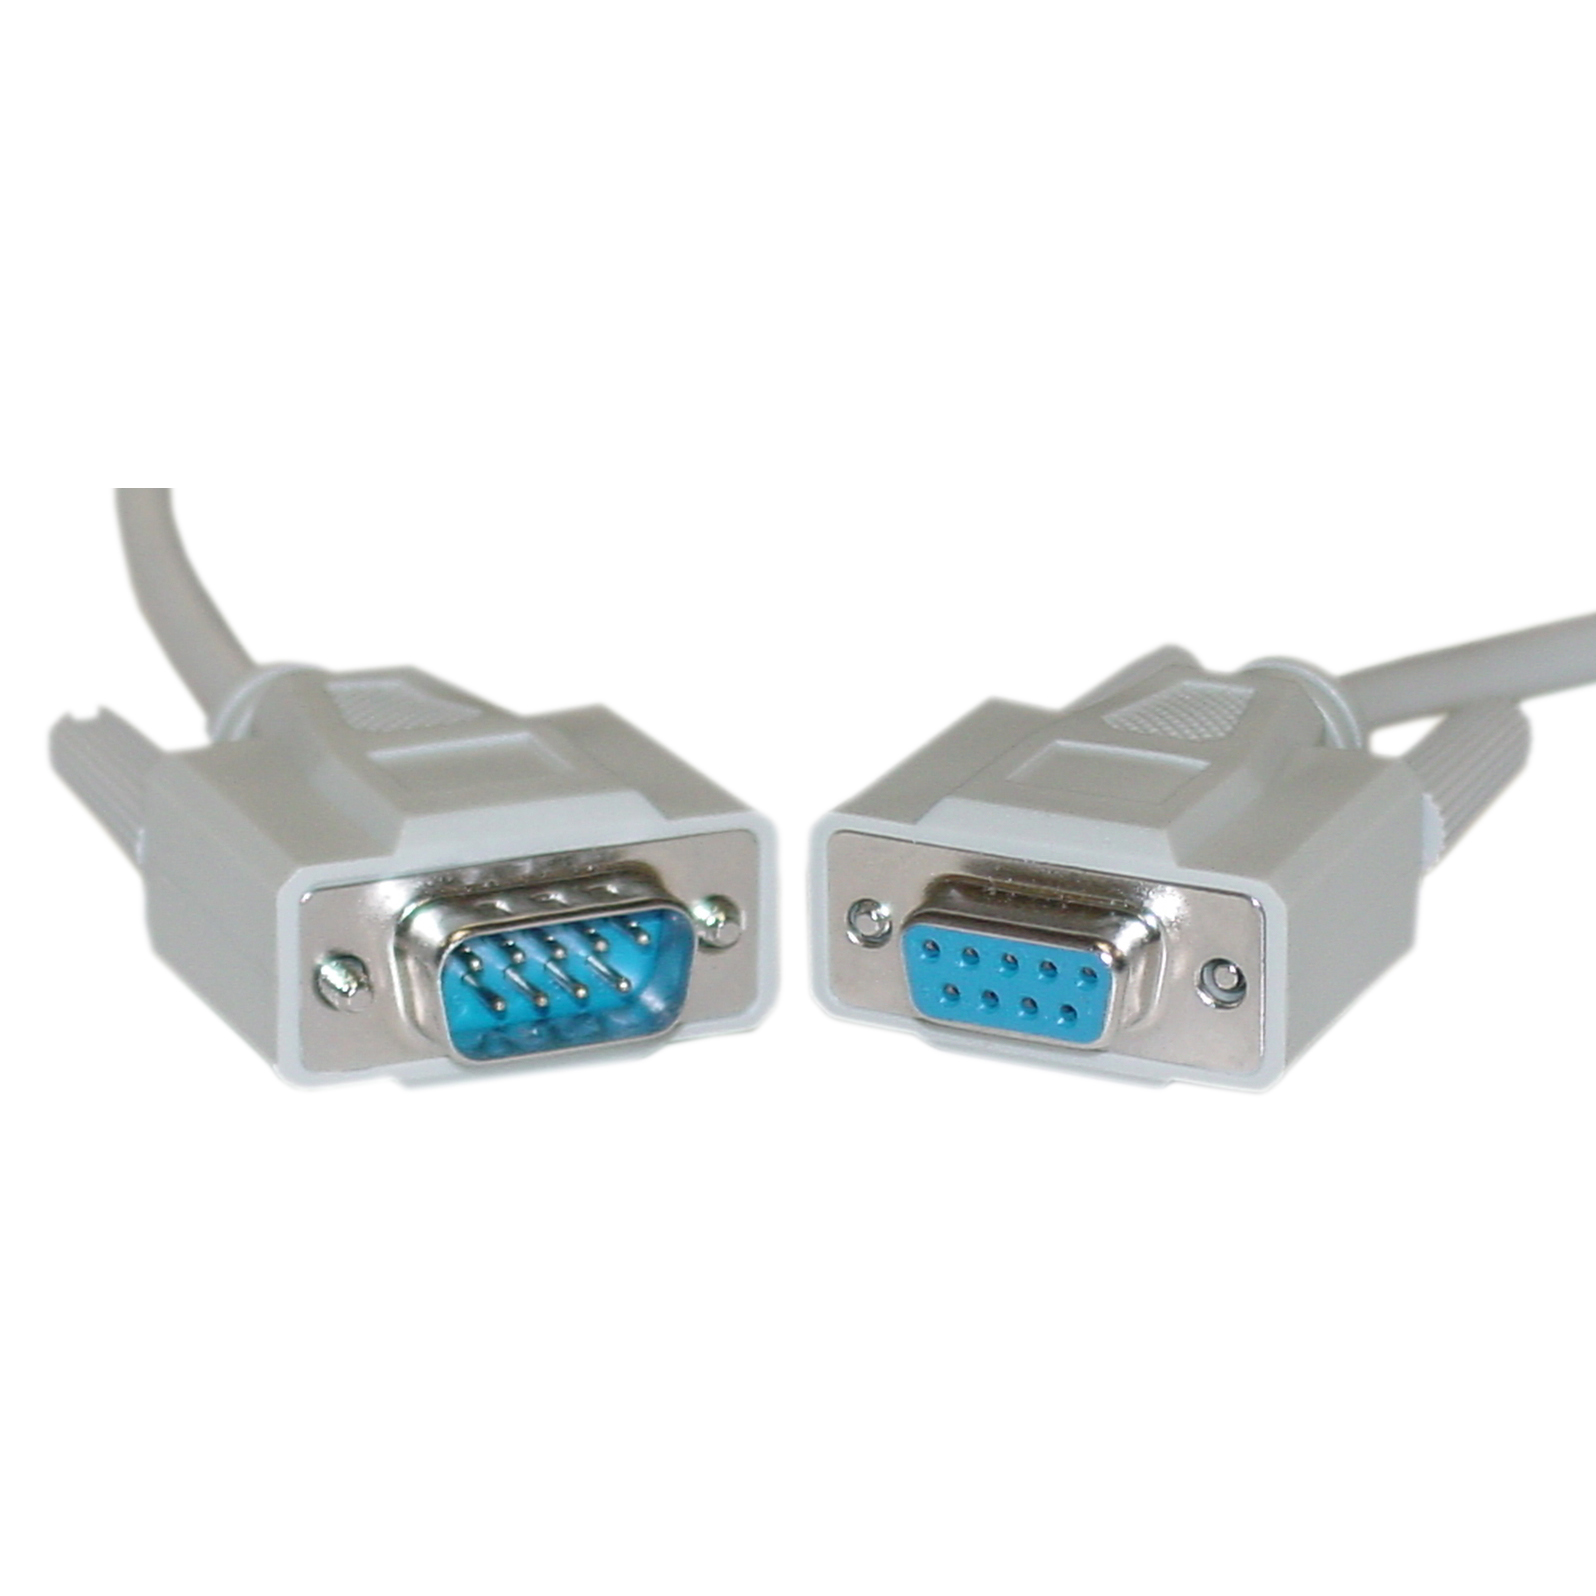 9C 10D1-03210 CableWholesale 10-Feet DB9 Male/DB9 Female Serial Cable 1:1